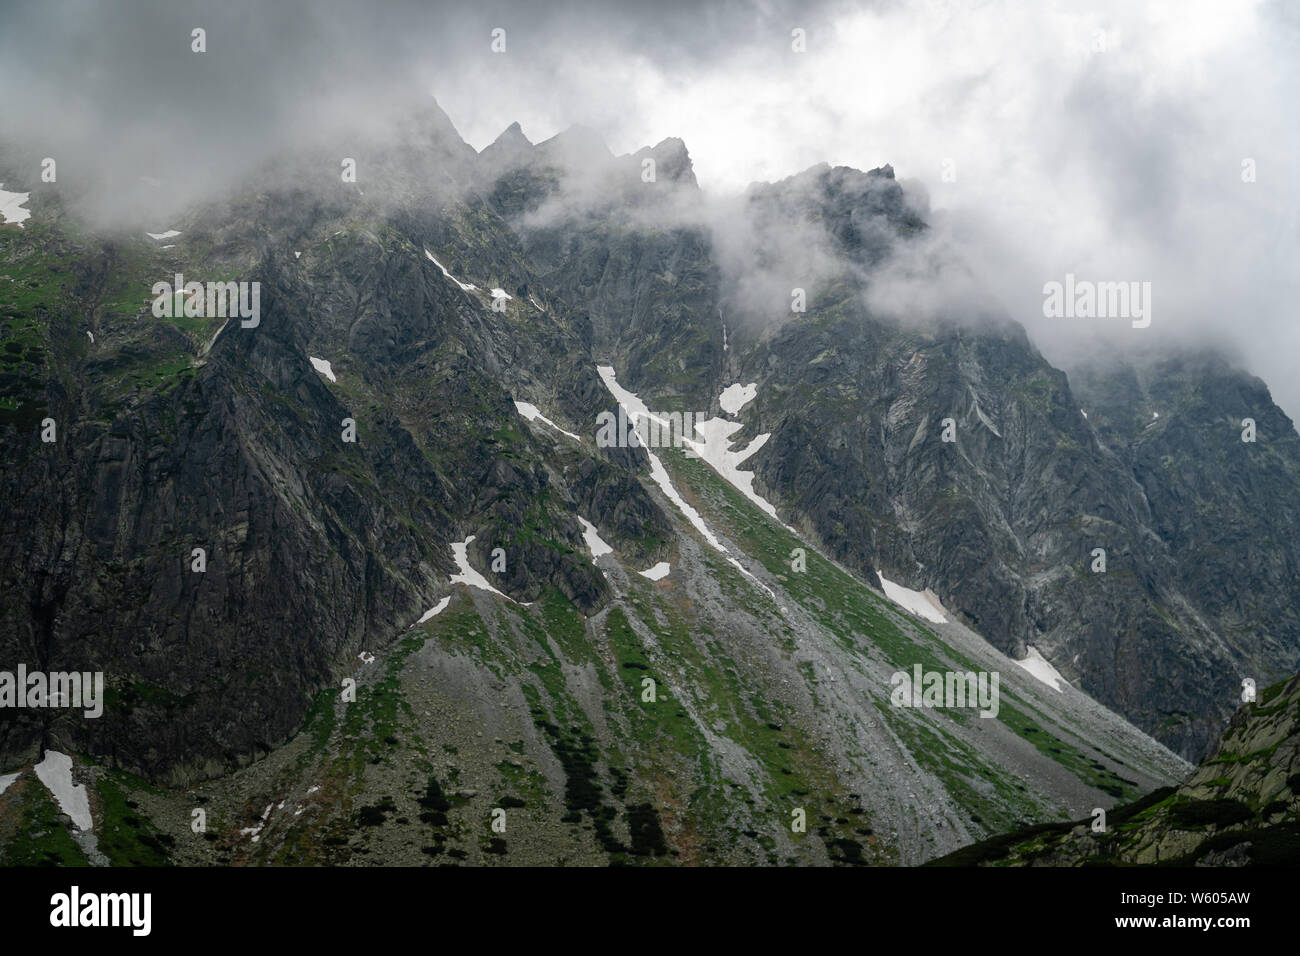 High Tatras mountain range covered in clouds Stock Photo